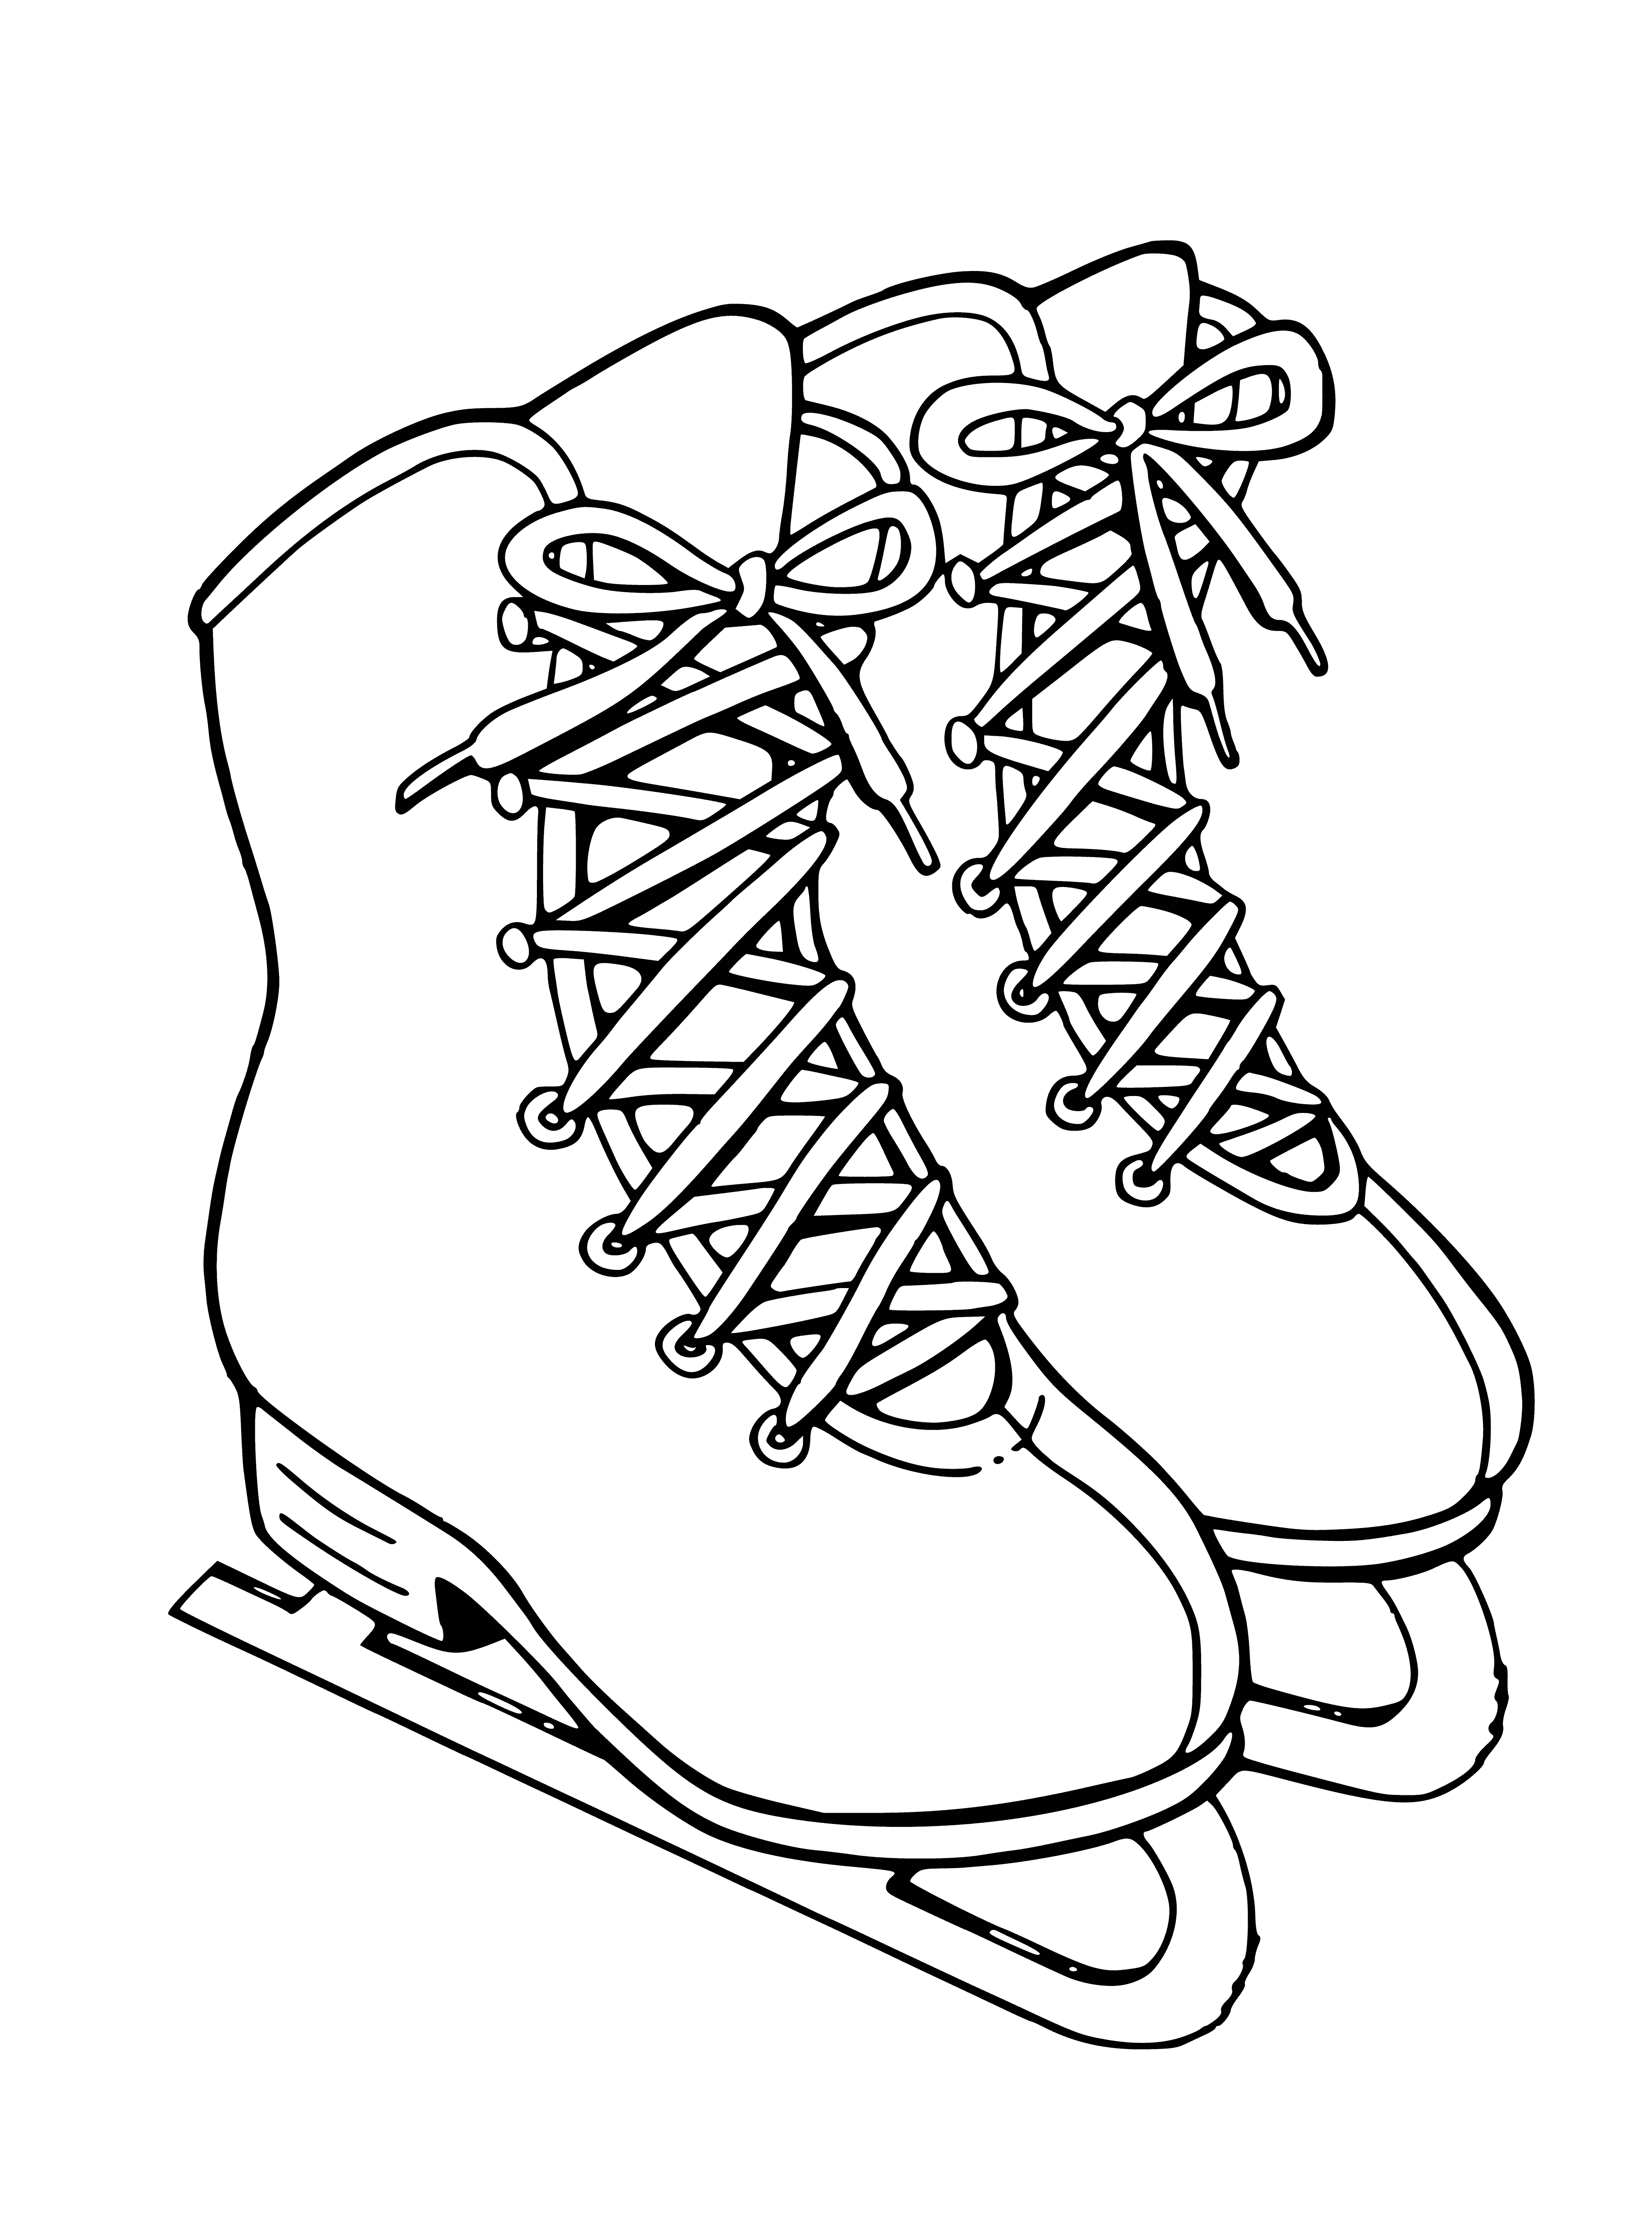 coloring page: Figure skates with black, white & silver details. Blades look sharp & skates are tied at the ankle. #SportsEquipment